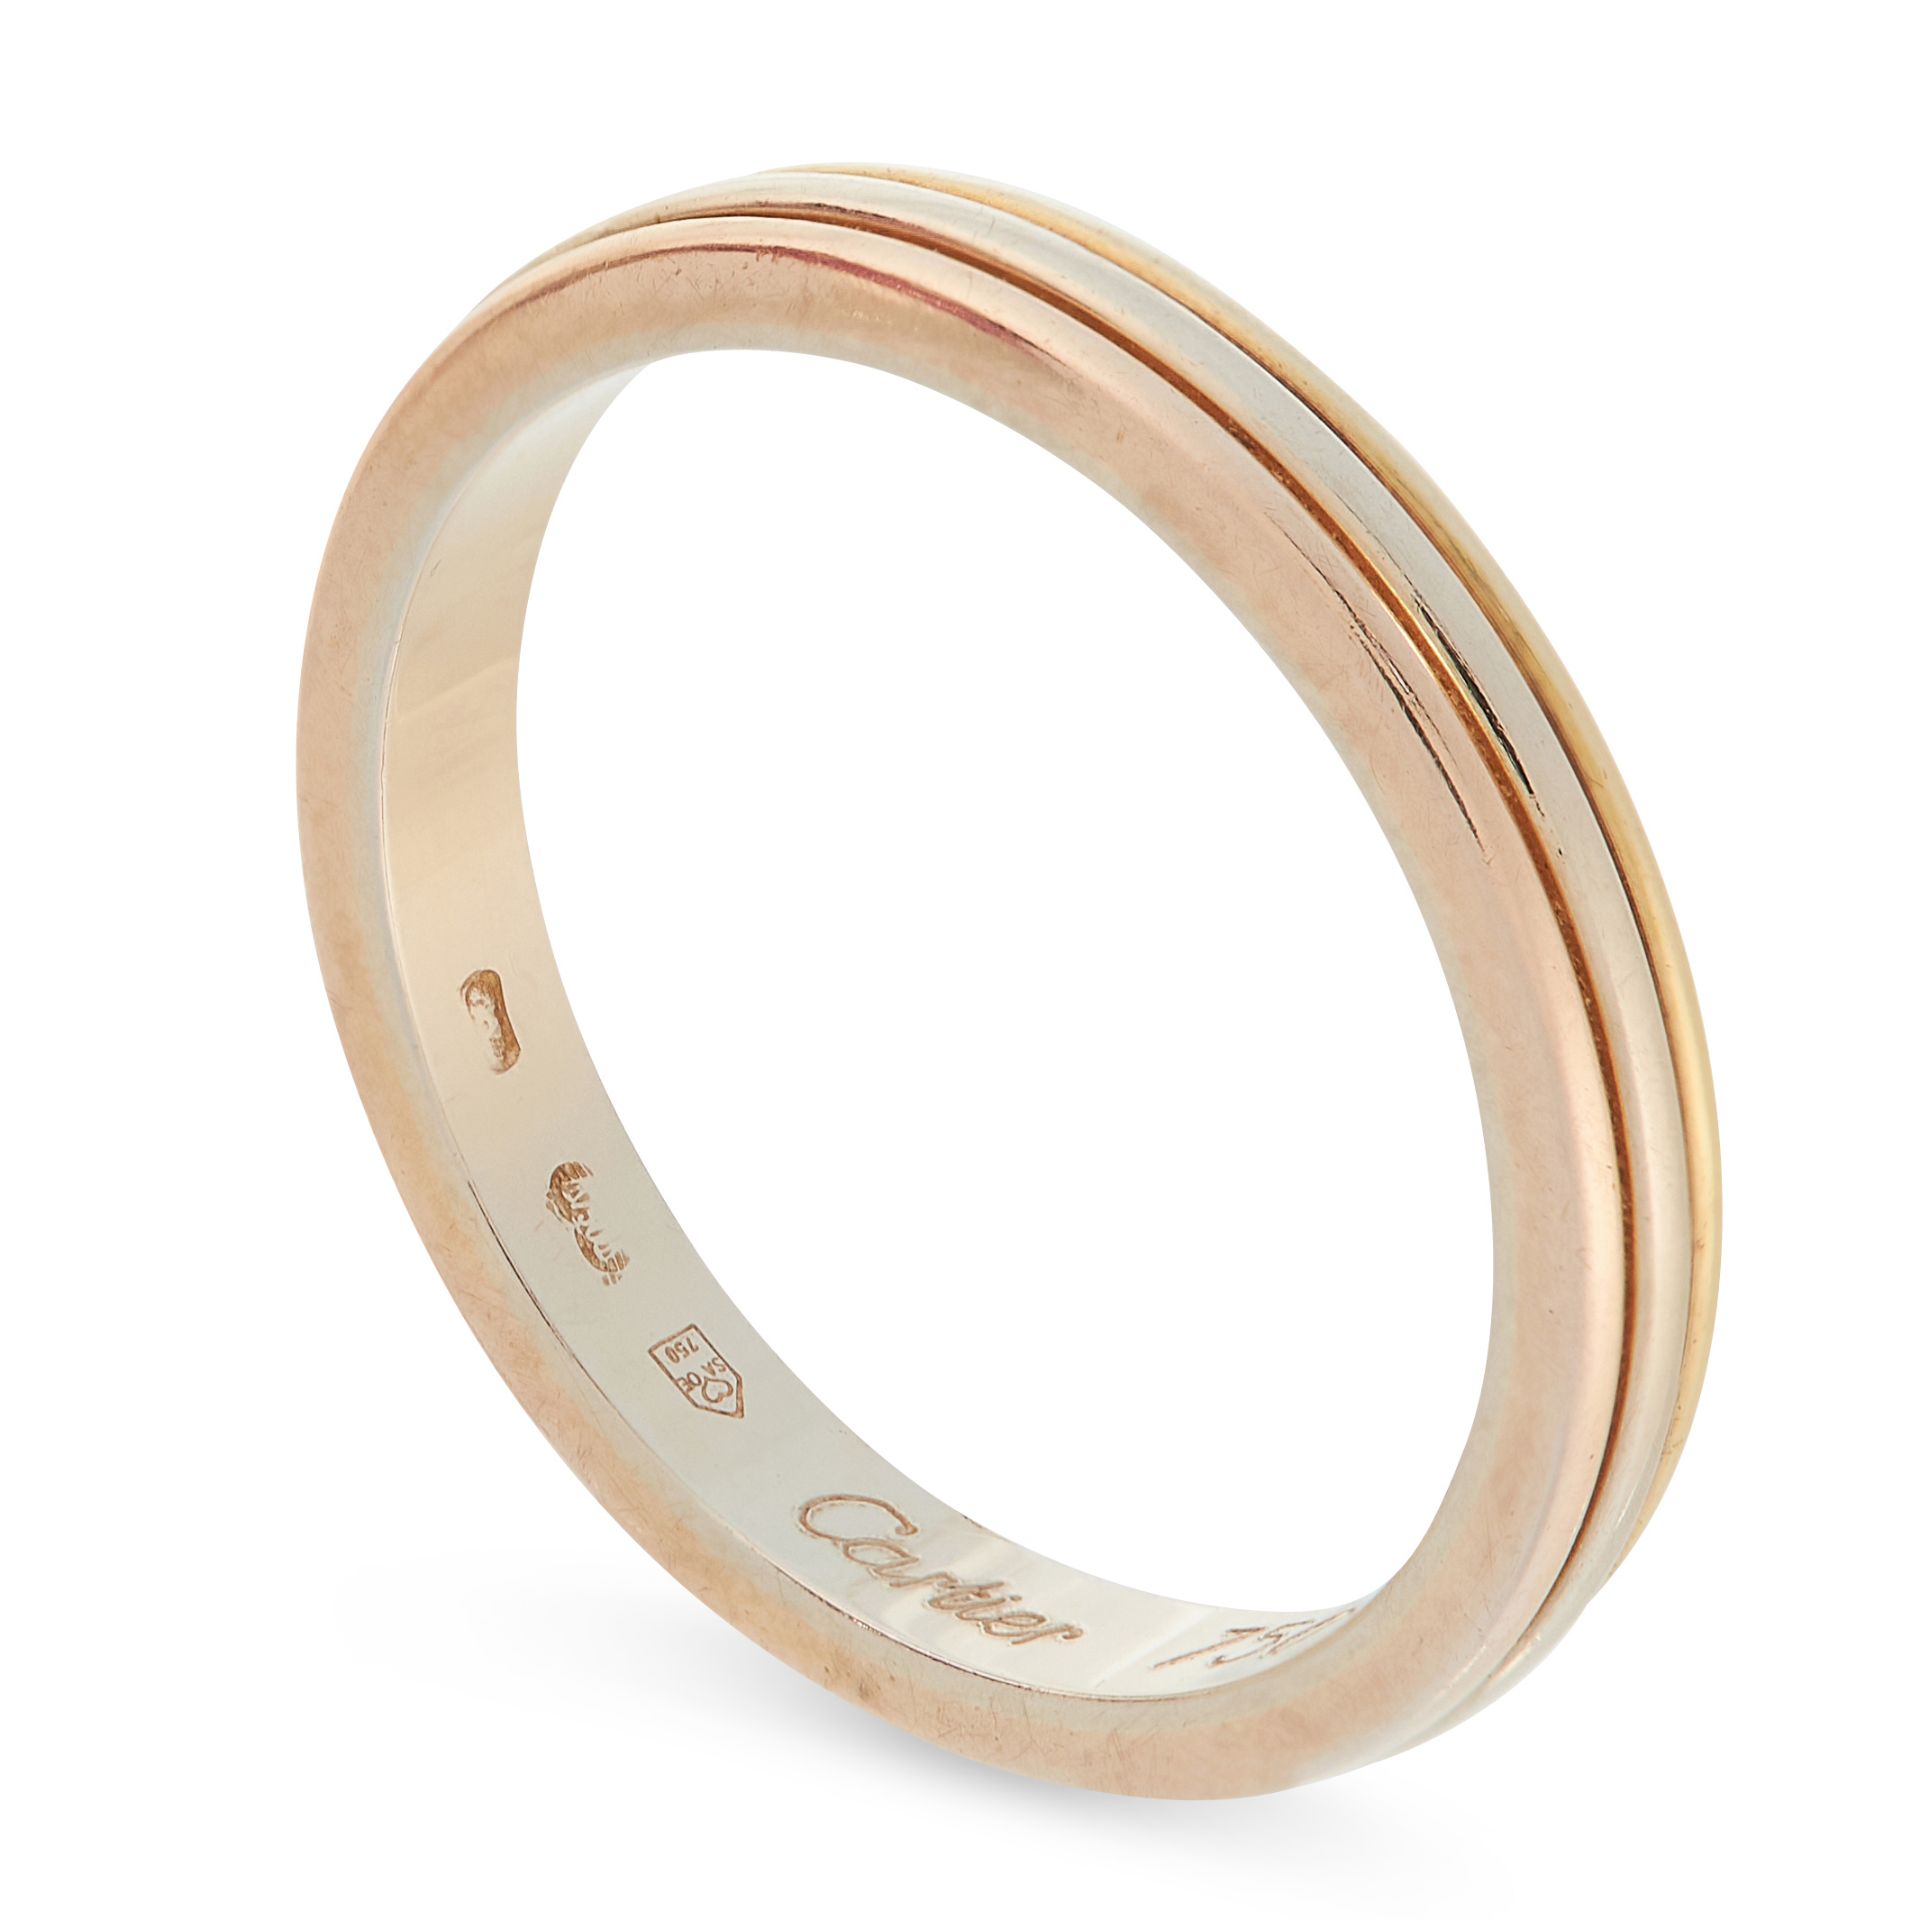 TRINITY DE CARTIER WEDDING BAND RING, CARTIER, 1988 in 18ct yellow, white and rose gold,